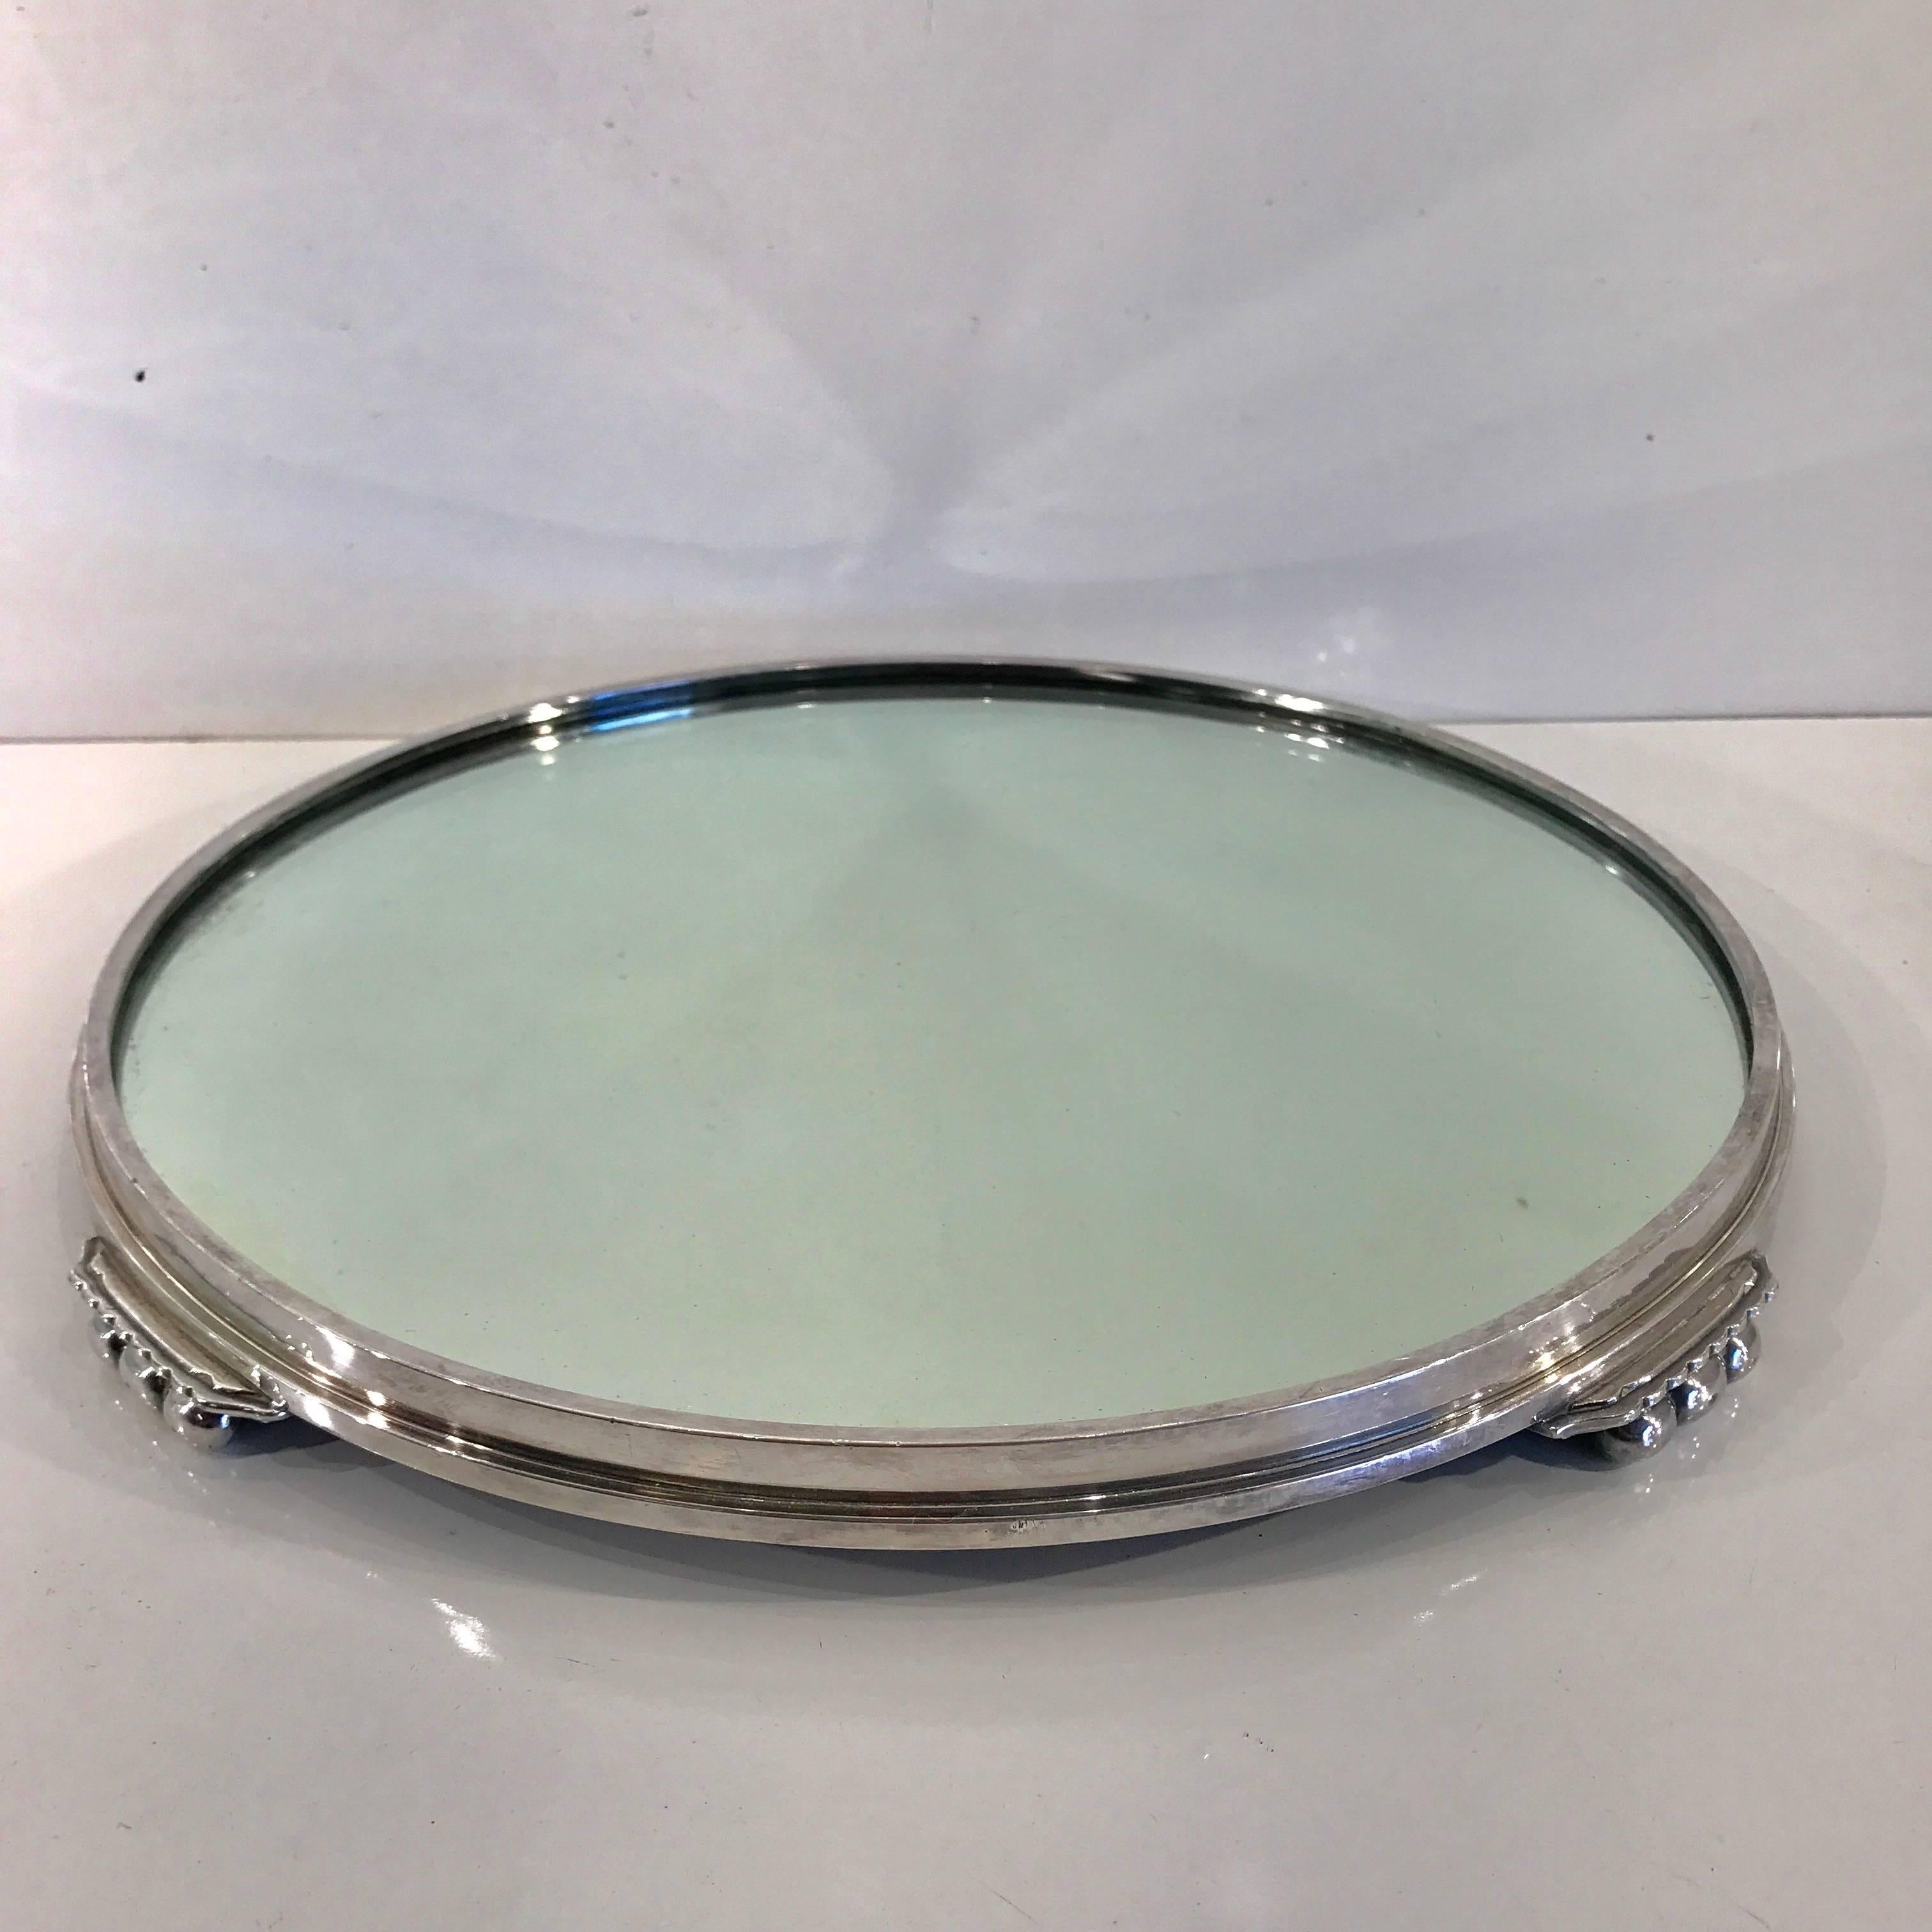 Art Deco silver plated round plateau, with inset 14" diameter original mirror, raised on four "Lug" feet, made by the International Silver Company.
This item is at our Atlanta GA, Location, not Palm Beach.
